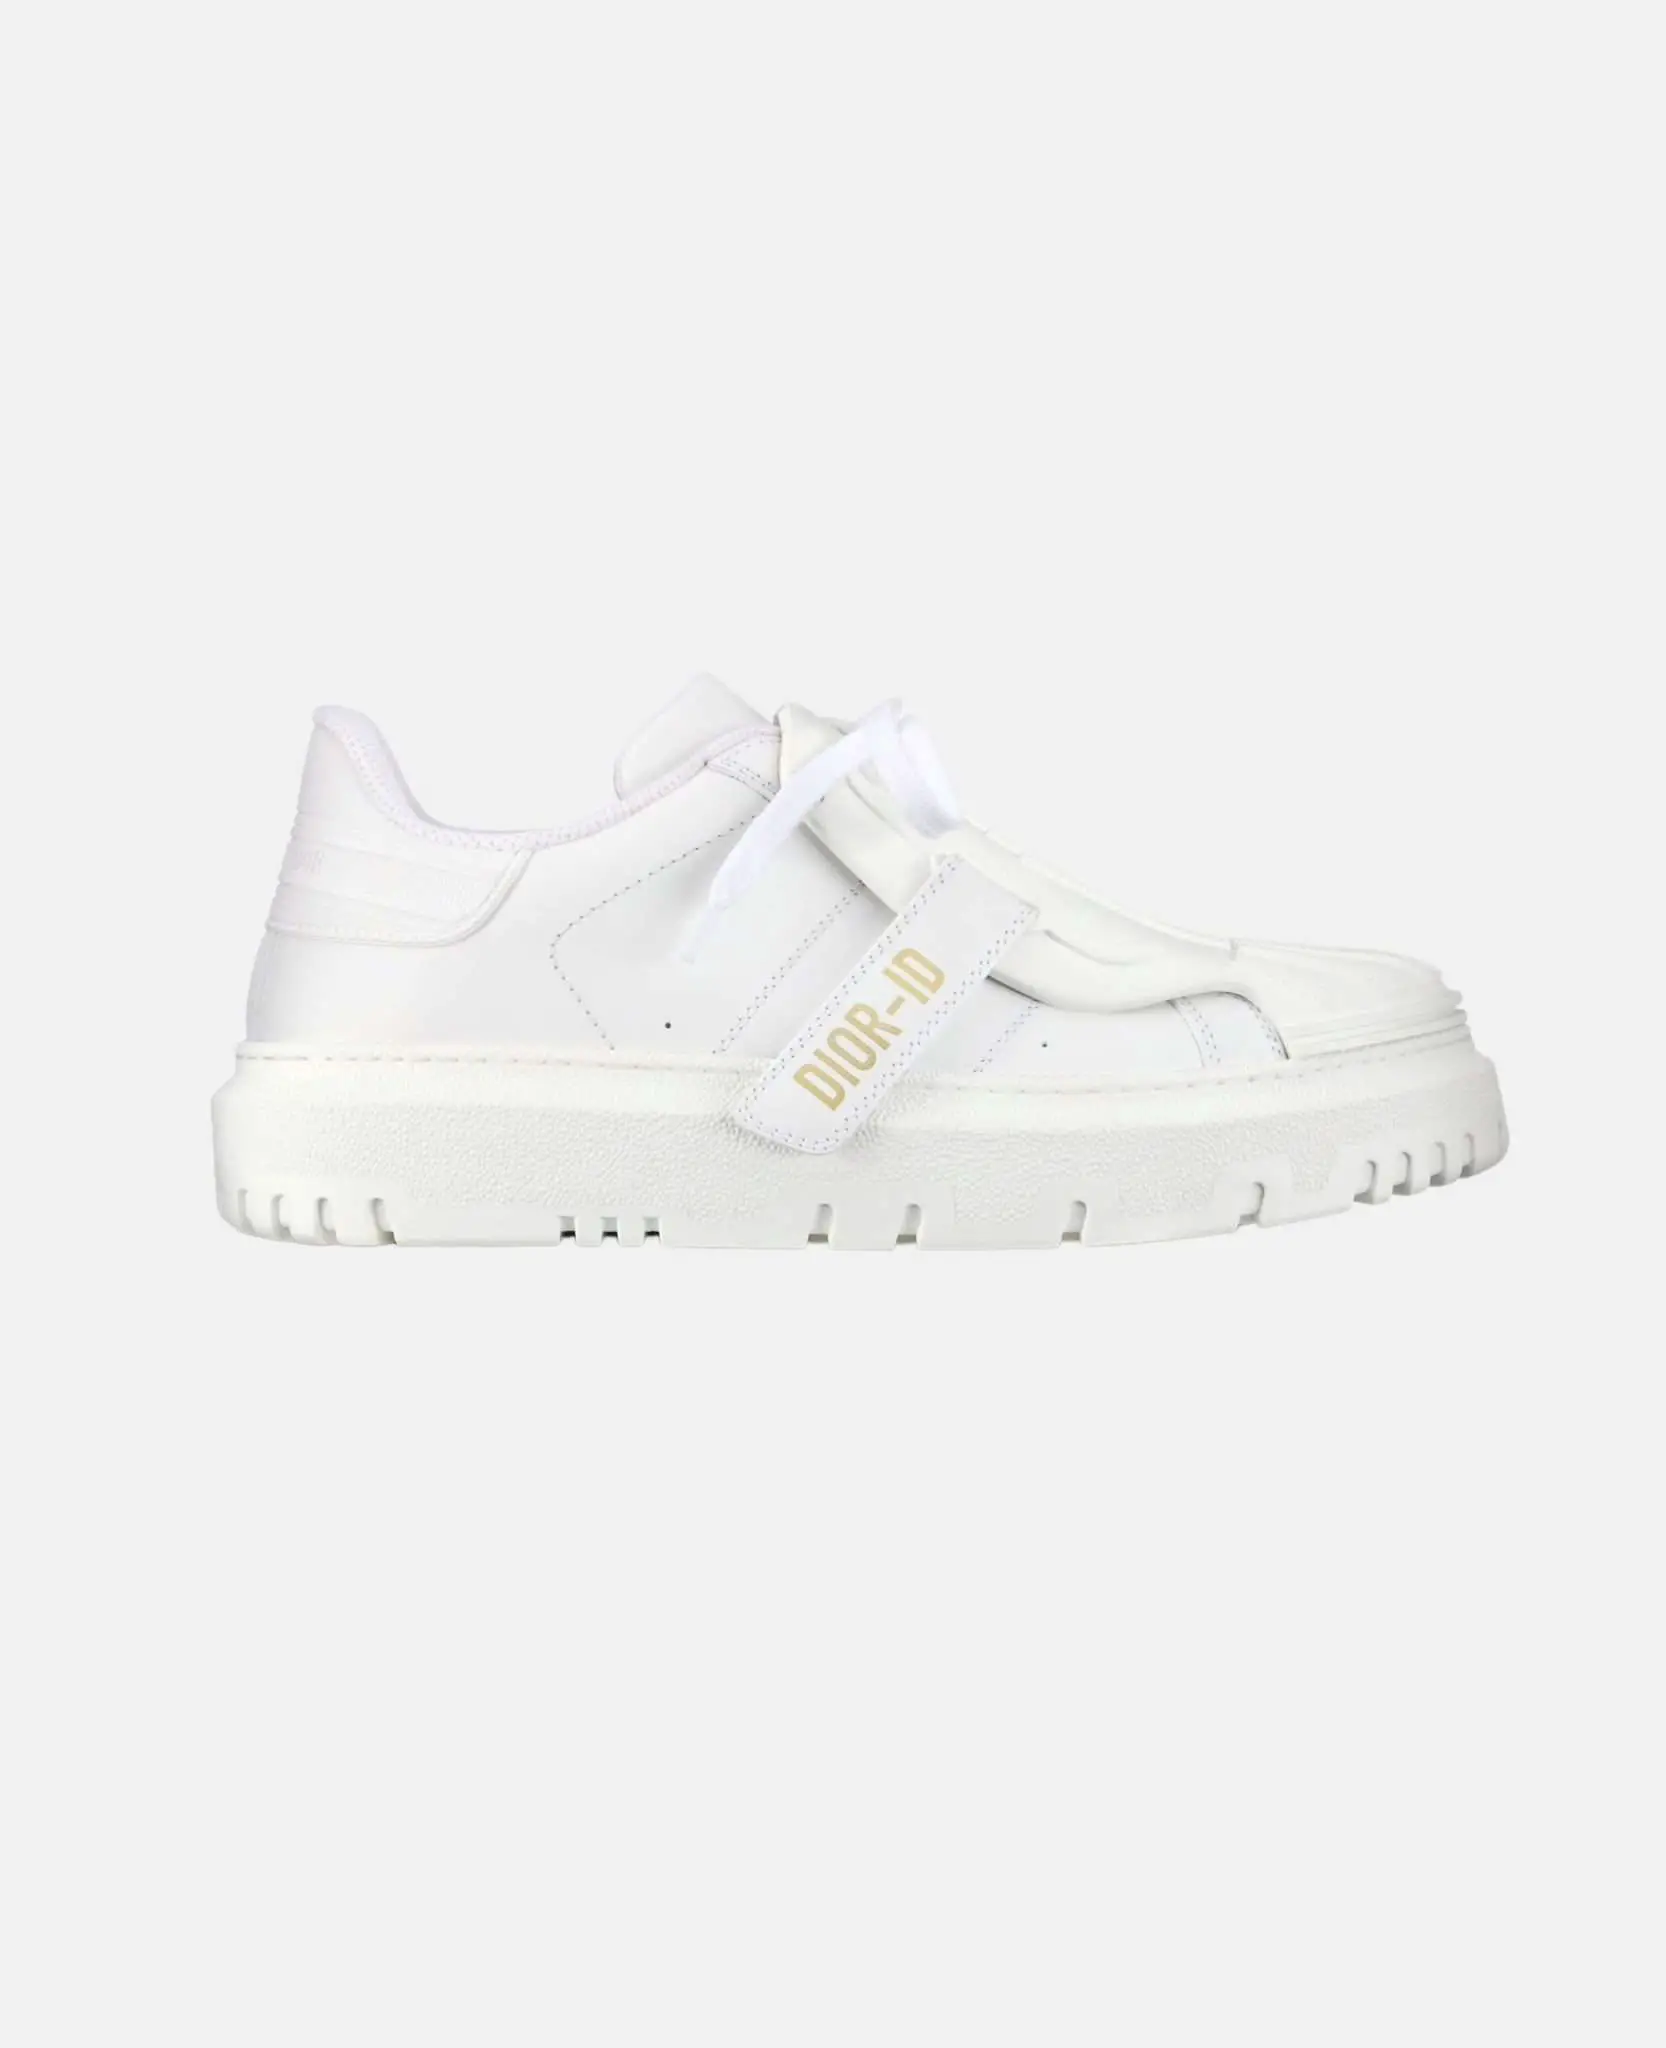 Versatile White Sneakers For Women That Will Match Everything